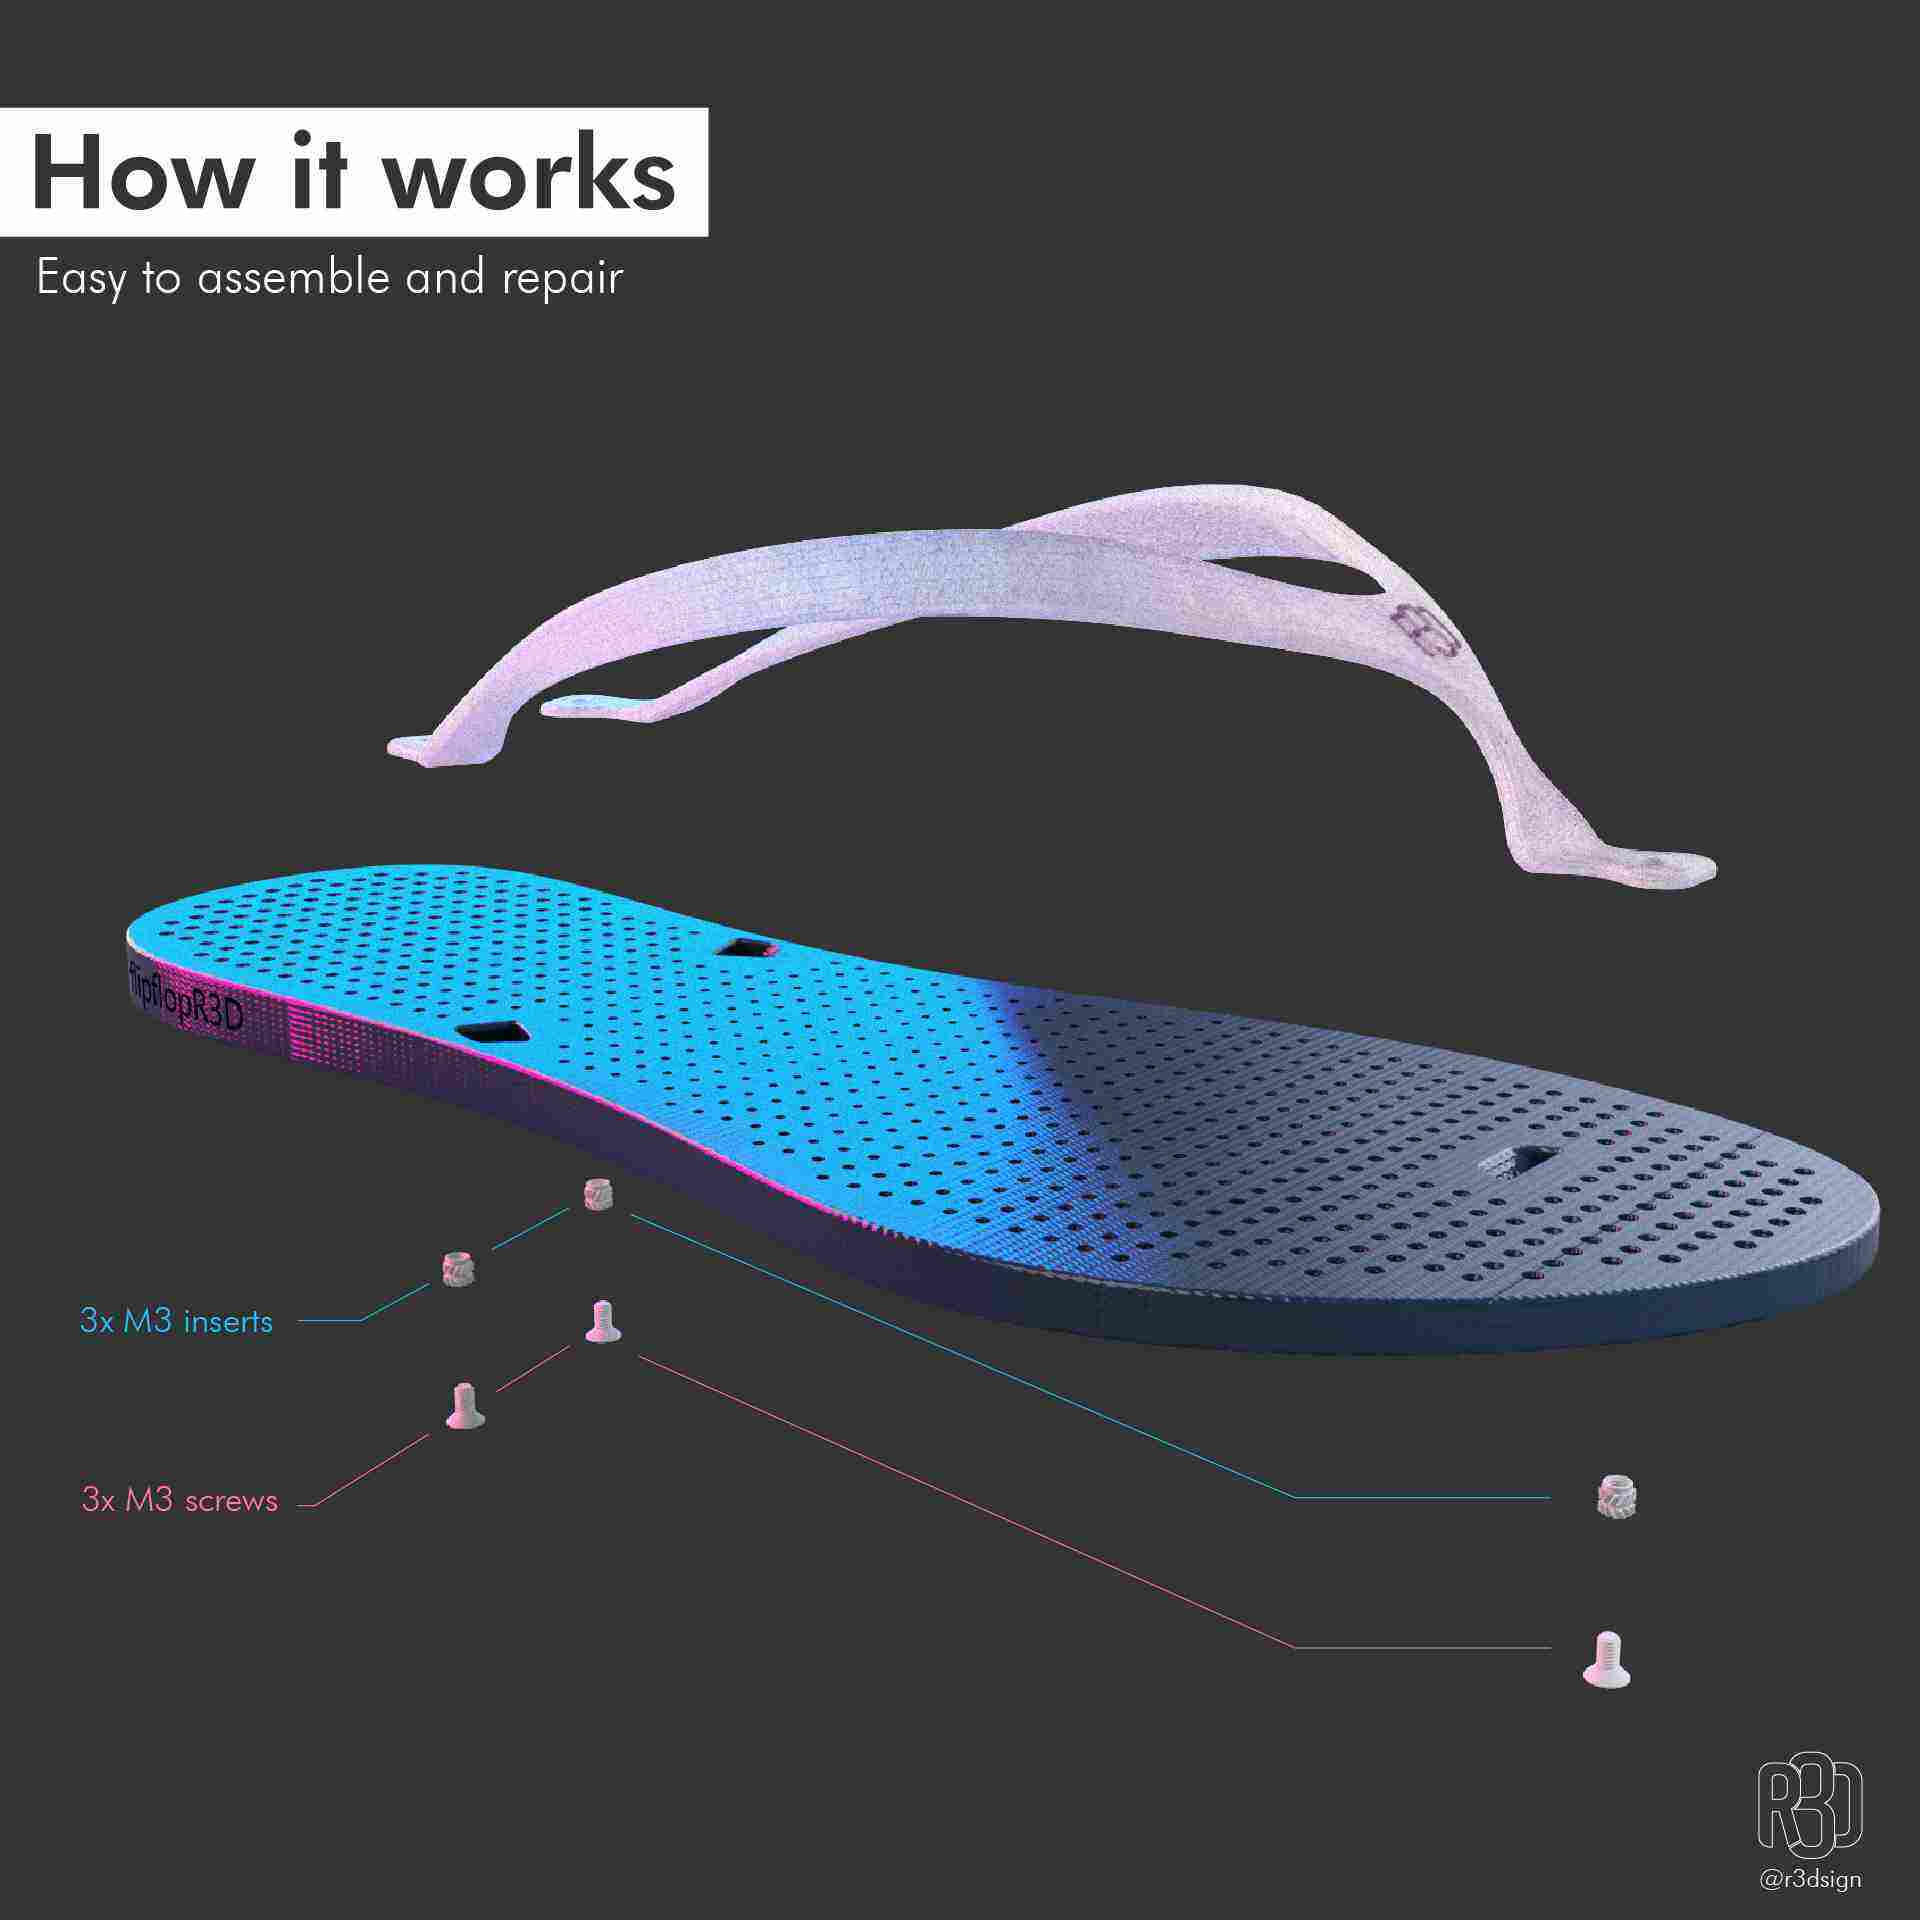 FlipFlopR3D - A 3D Printed Sustainable Sandal